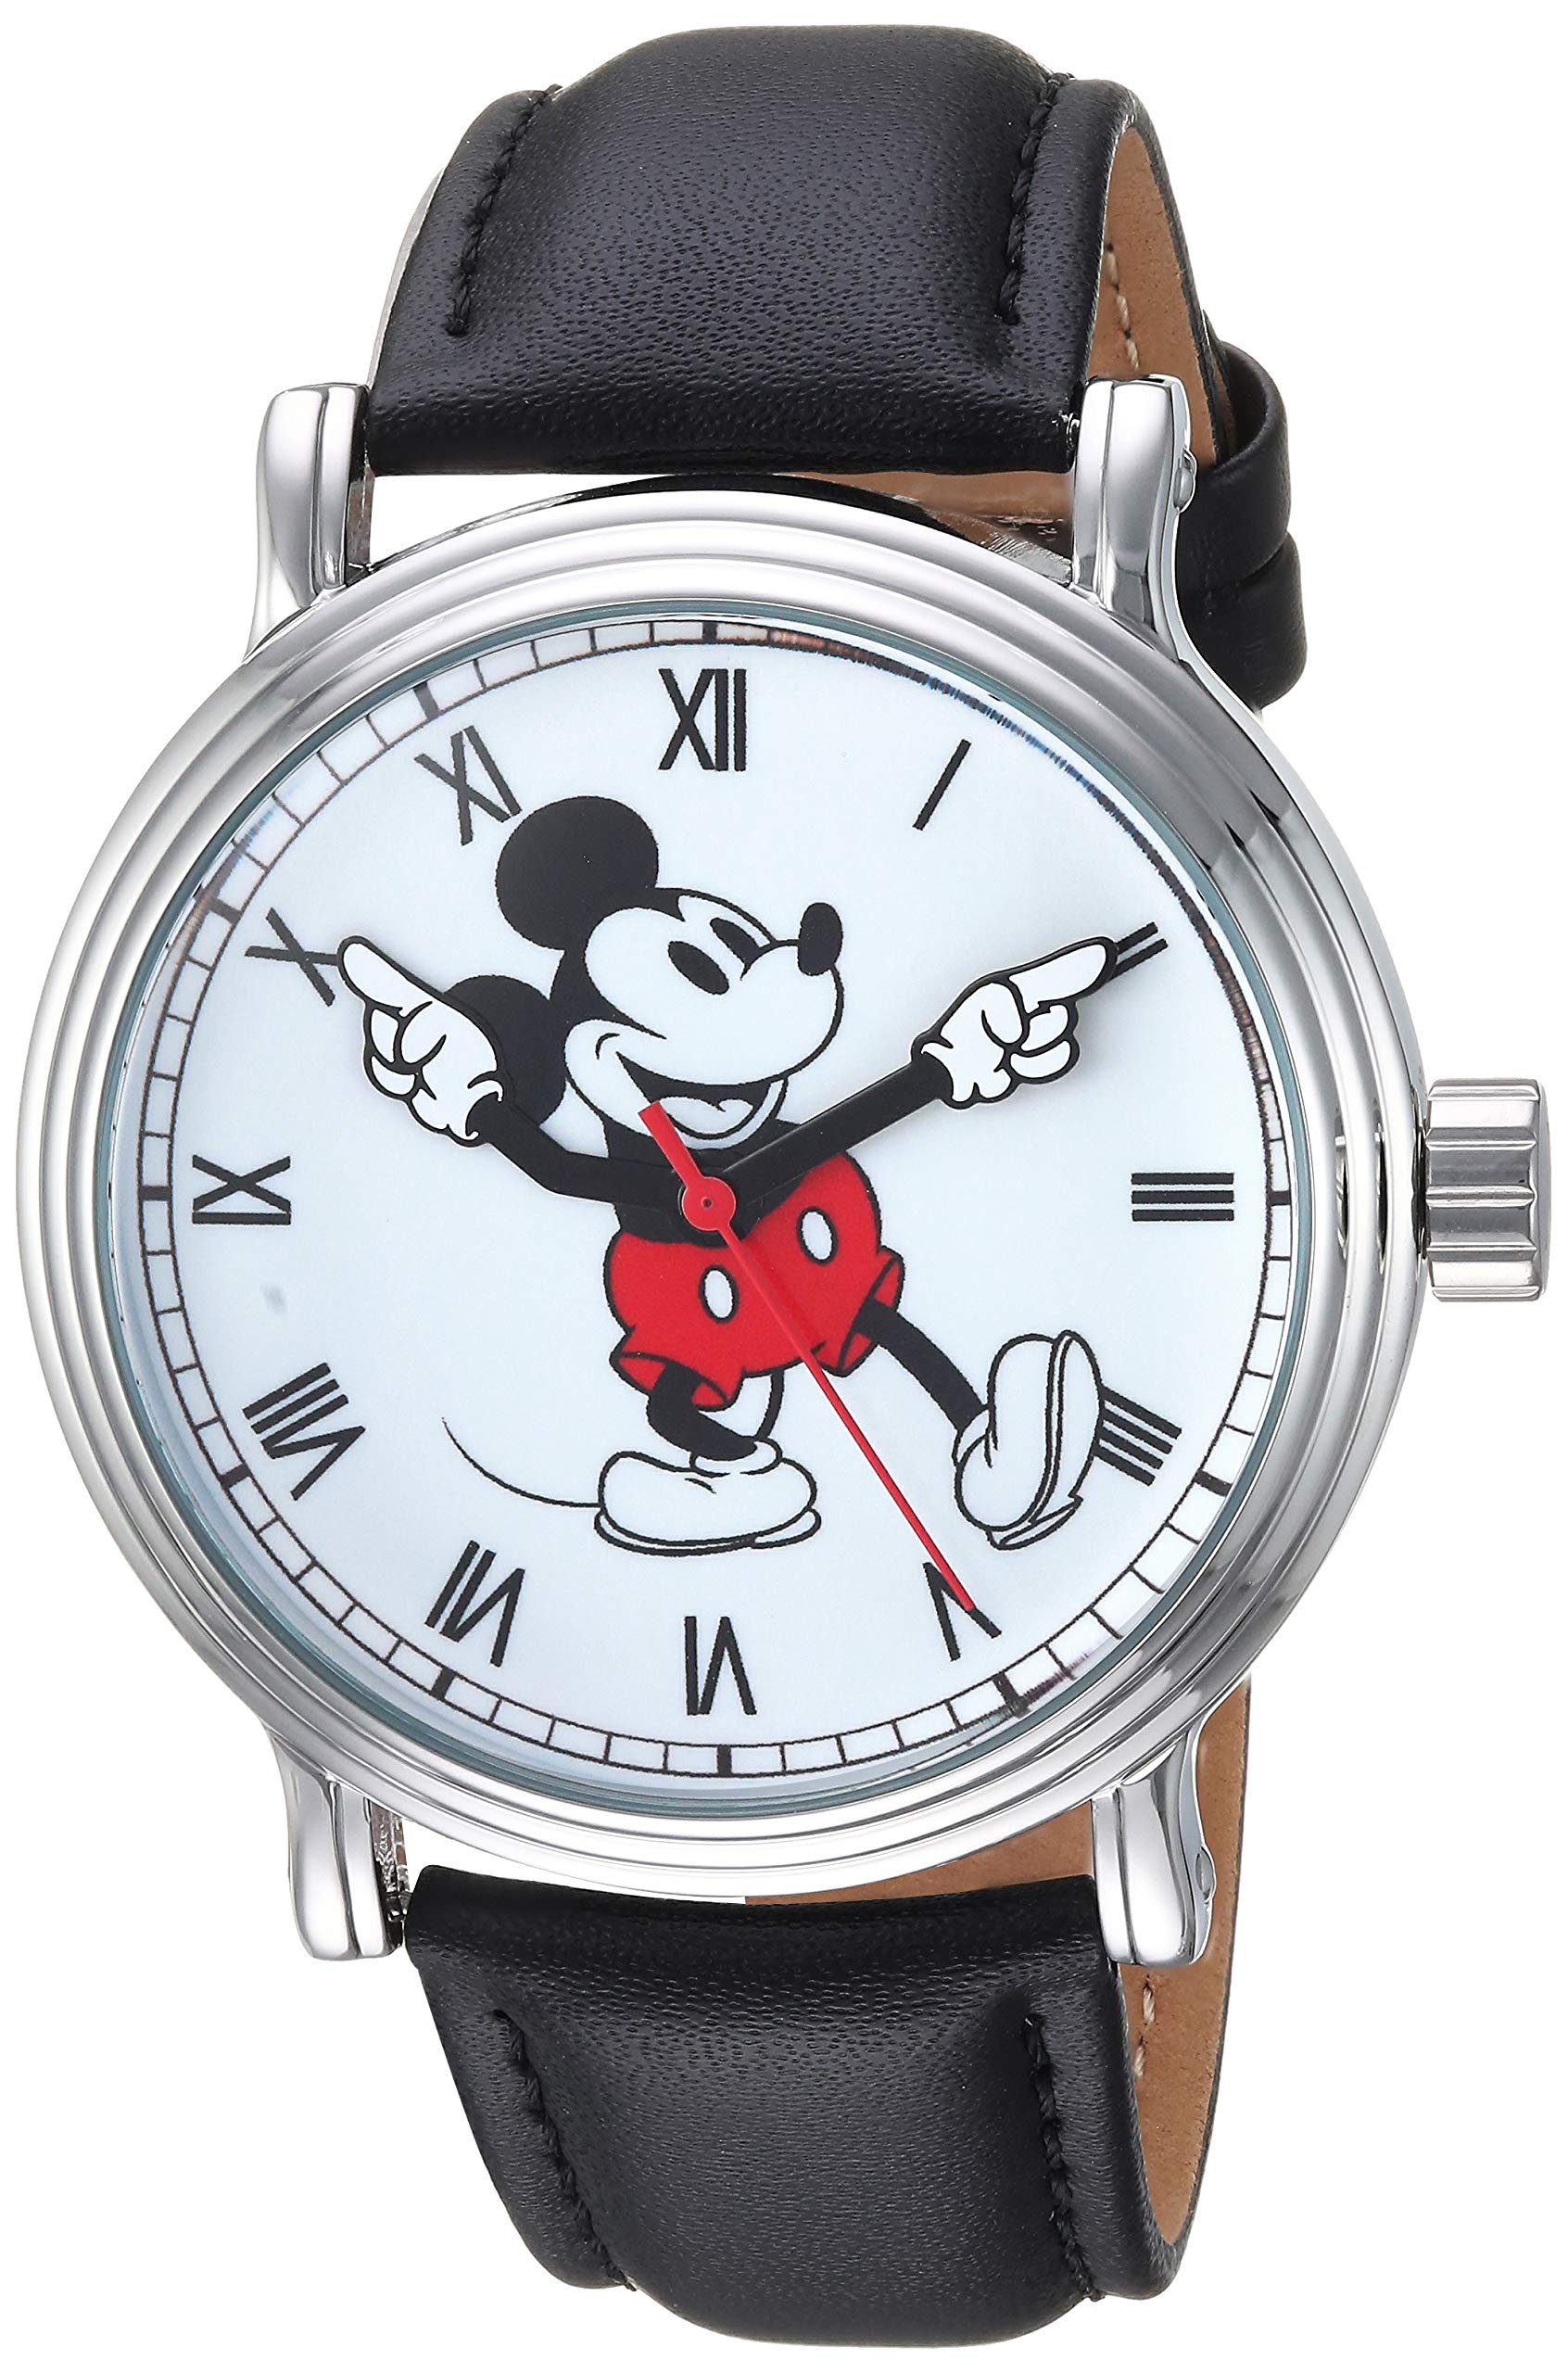 Disney Mickey Mouse Adult Vintage Articulating Hands Analog Quartz Watch, Silver/BLK $20.16